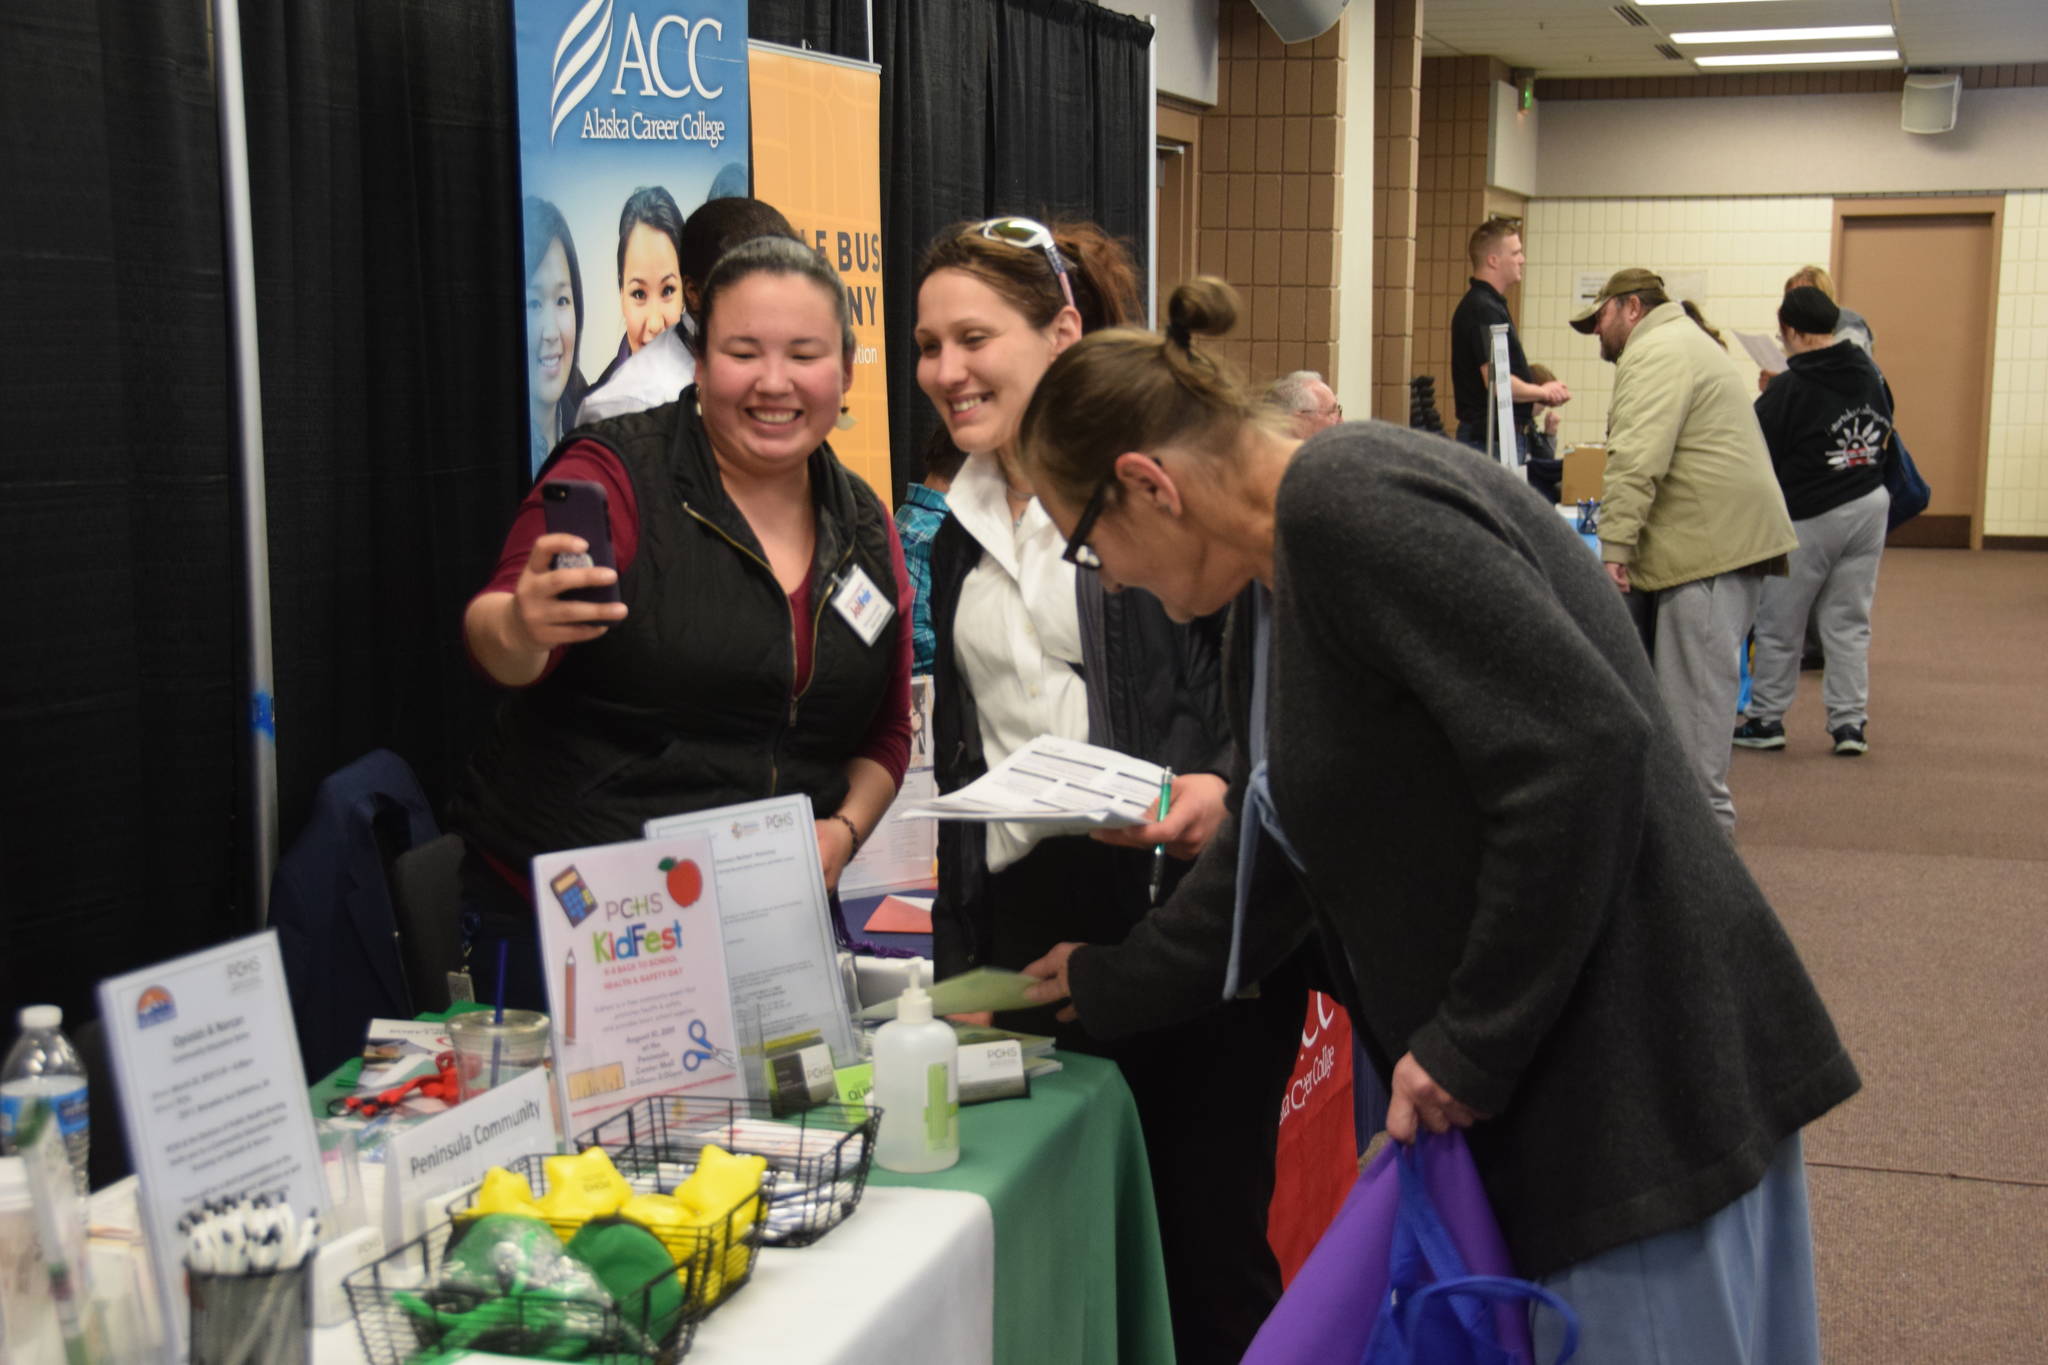 A Peninsula Community Health Services representative takes a selfie with a potential new hire during the Peninsula Job Fair at the Soldotna Regional Sports Complex in Soldotna, Alaska, on March 21, 2019. (Photo by Brian Mazurek/Peninsula Clarion)